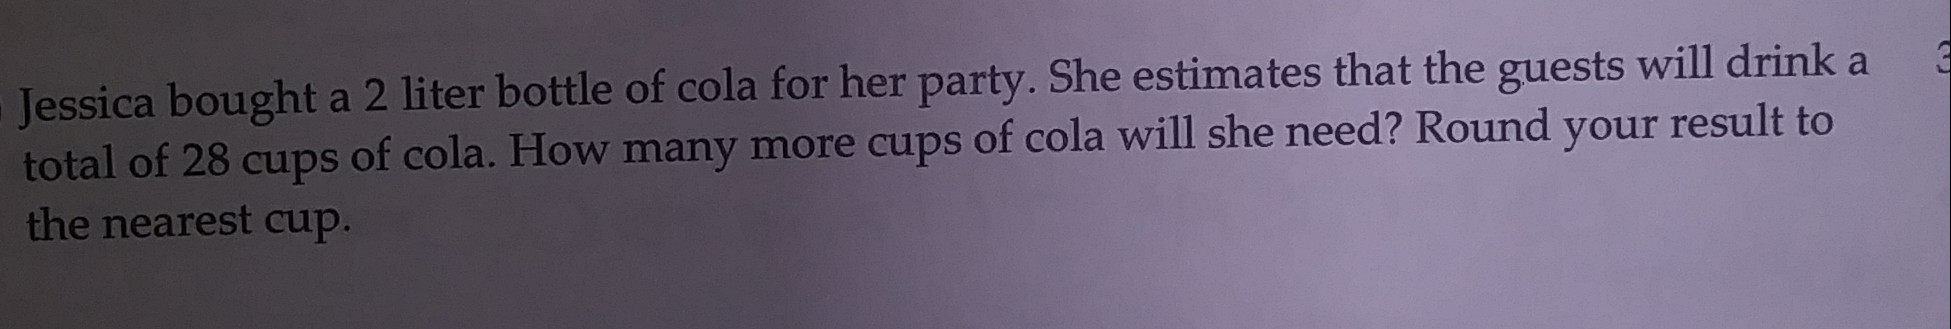 a 2 liter bottle of cola for her party. She estimates that the guests will drink a
Jessica bought
total of 28 cups of cola. How many more cups of cola will she need? Round your result to
the nearest cup.
